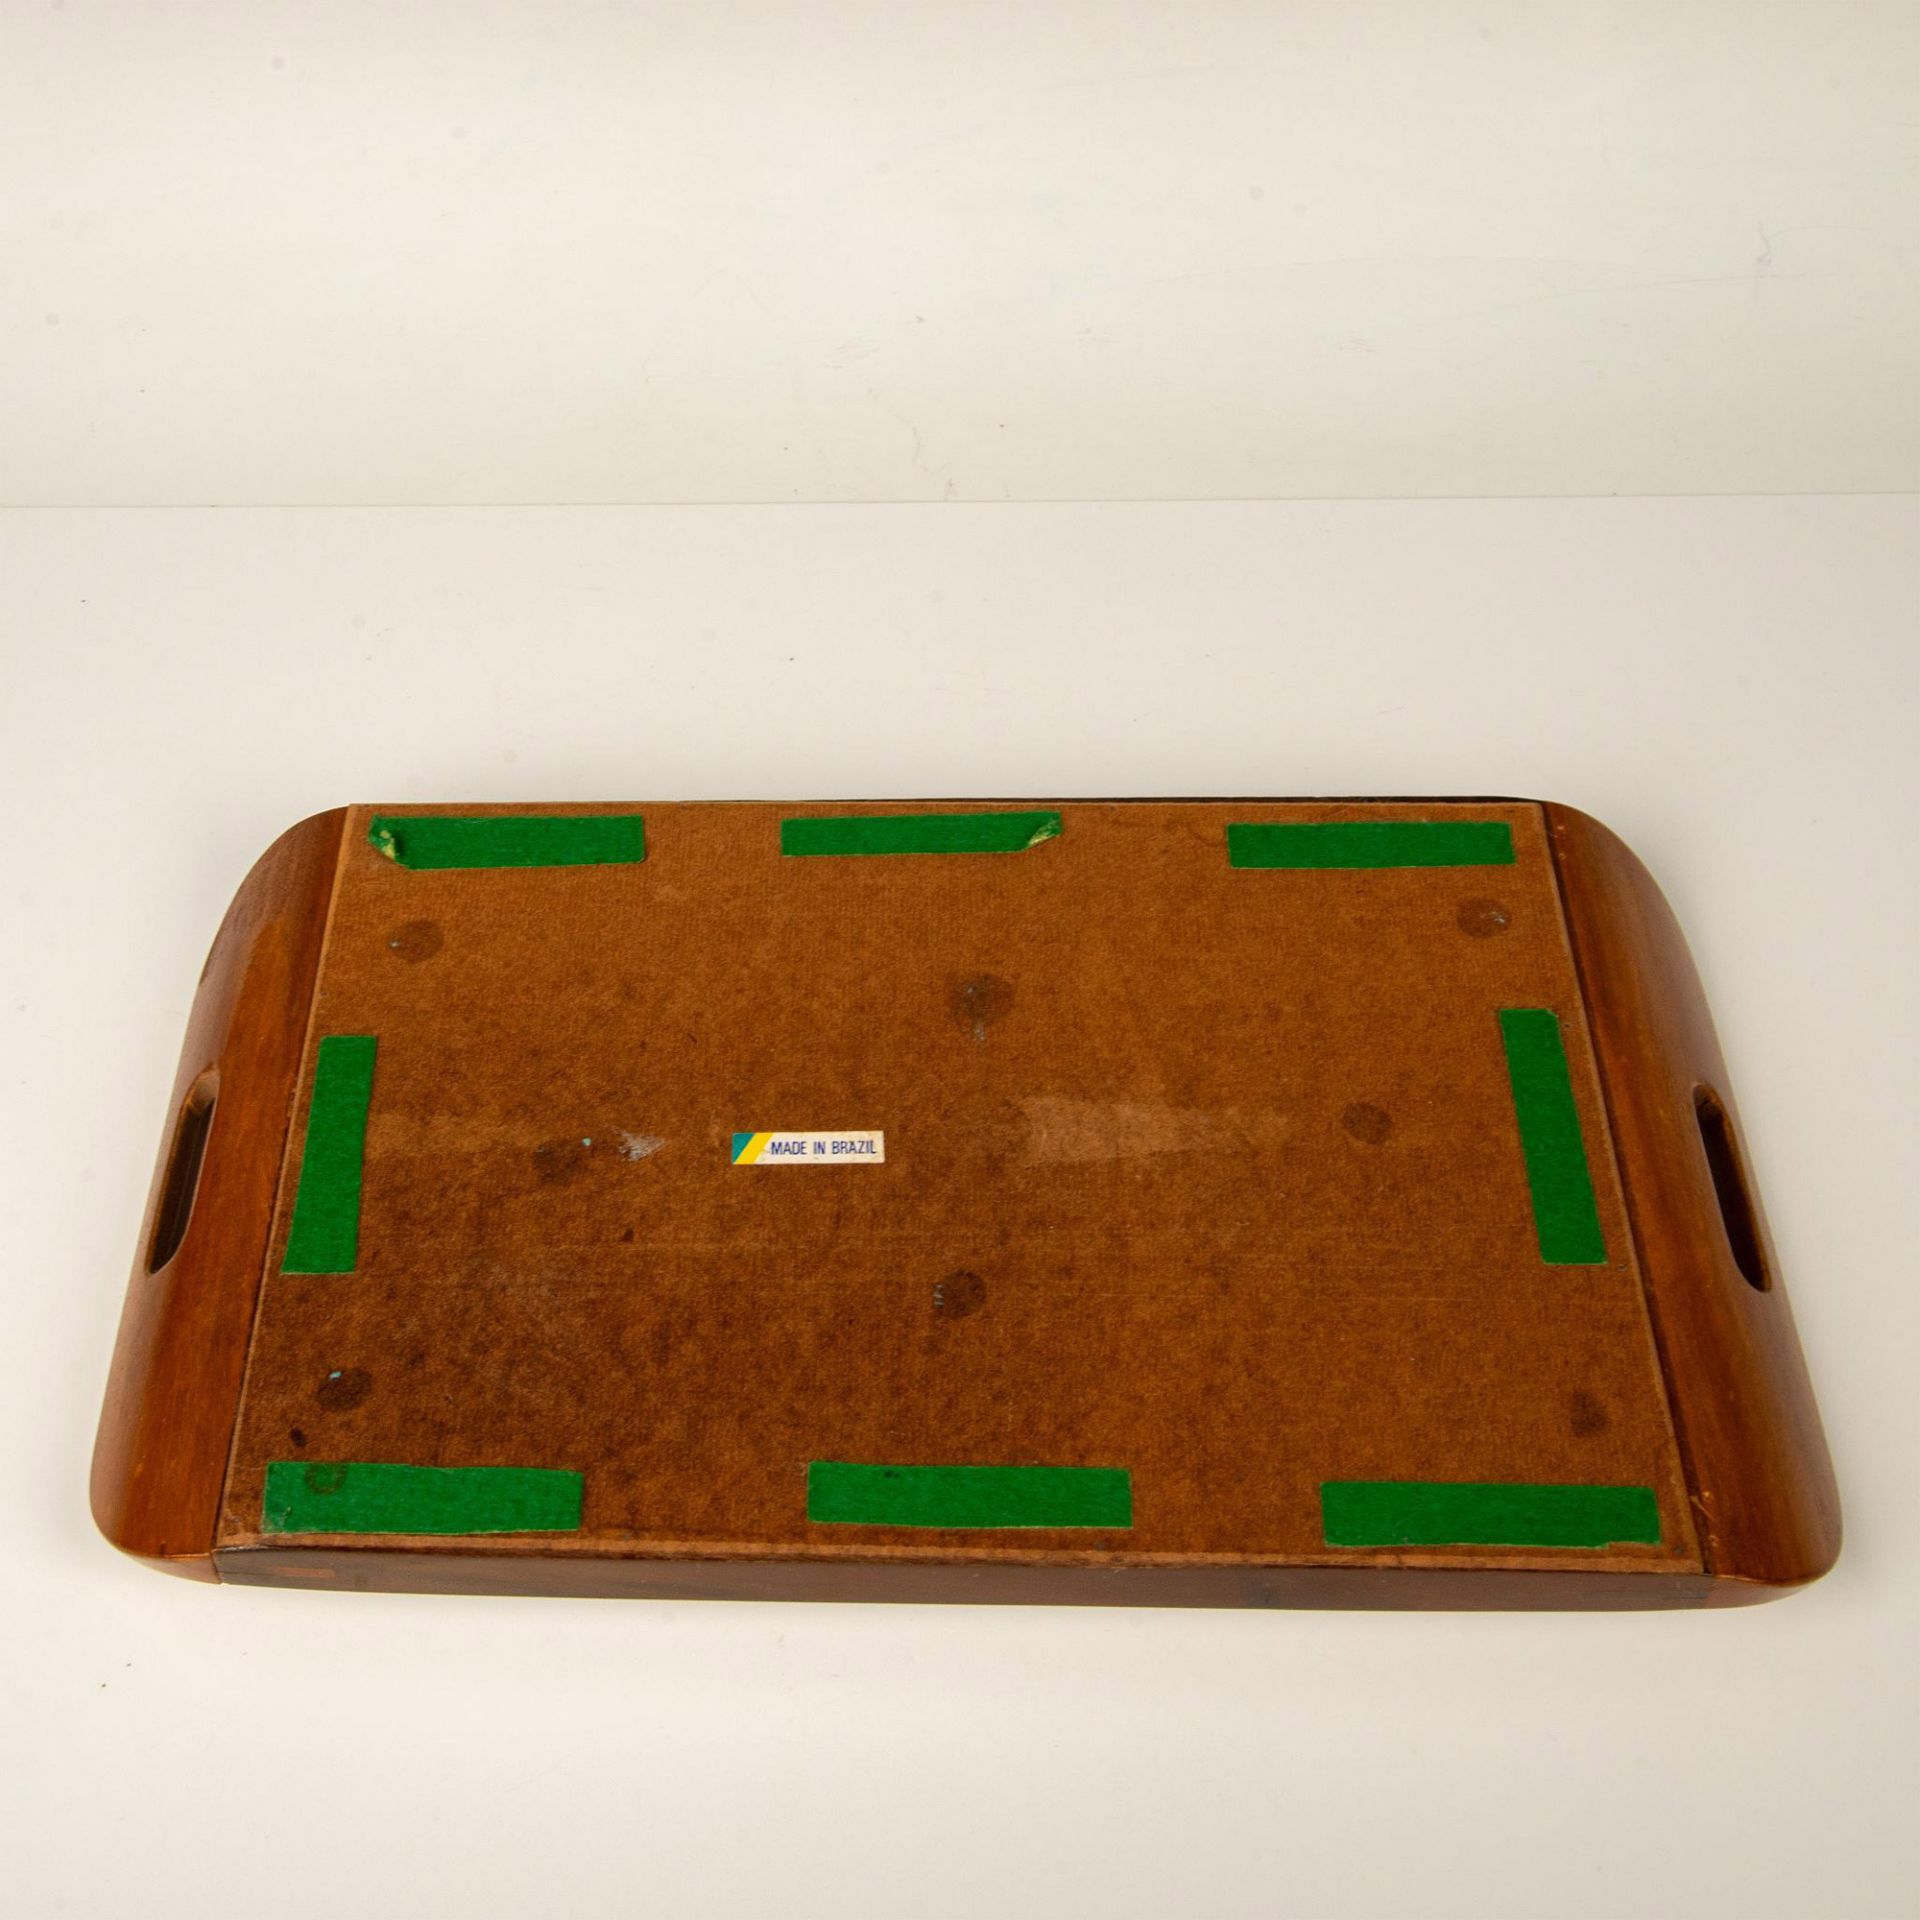 Butterfly Wing Art Inlaid Wood Tray - Image 3 of 3